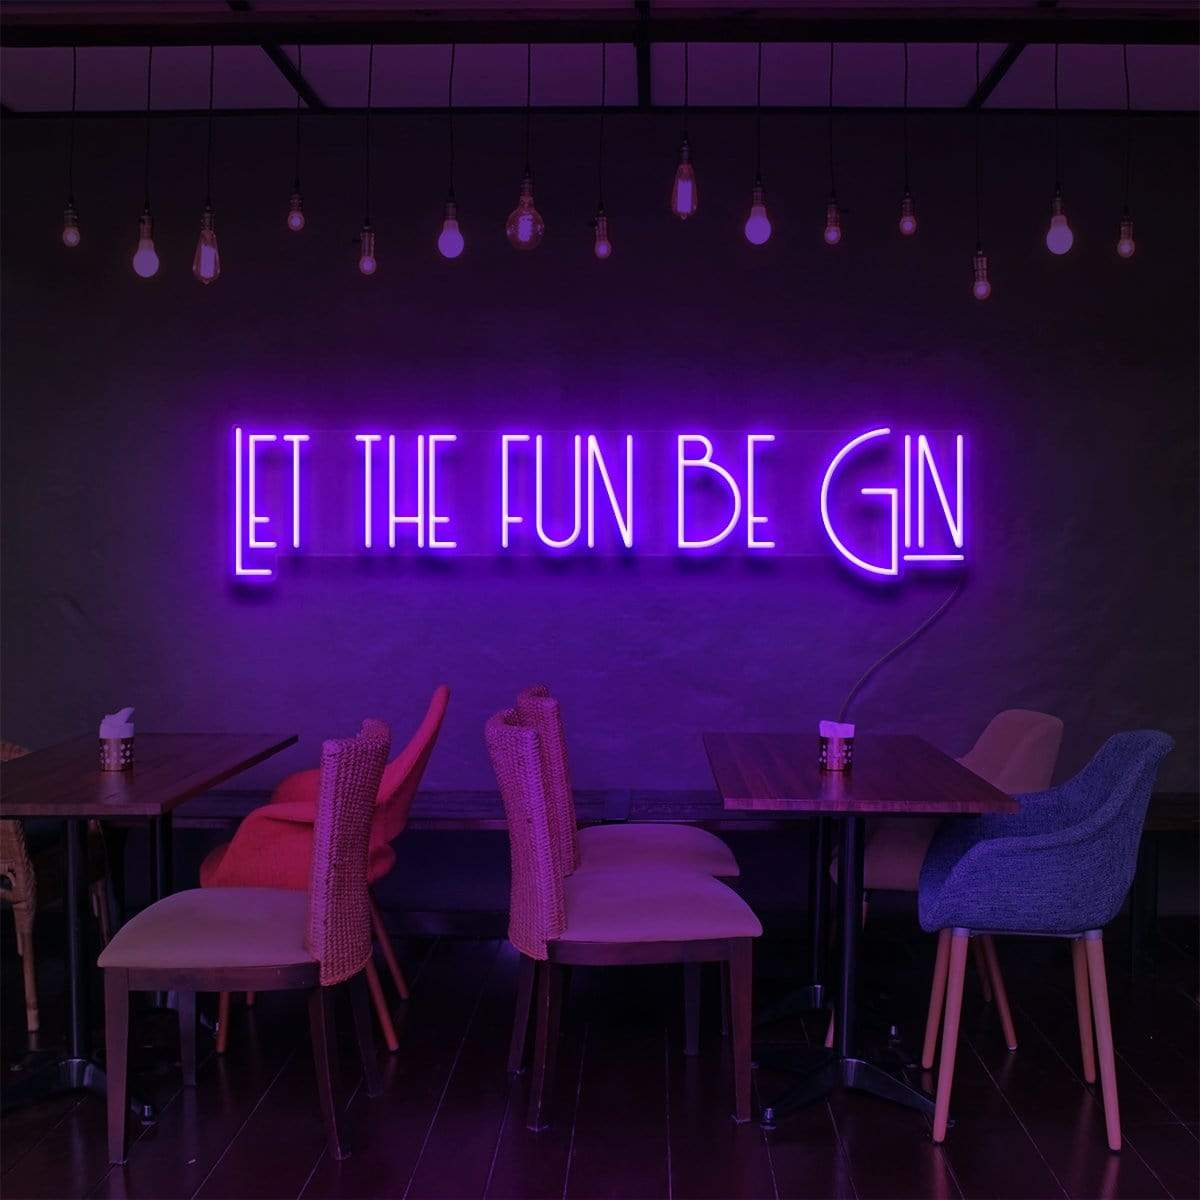 "Let The Fun Be Gin" Neon Sign for Bars & Restaurants 90cm (3ft) / Purple / LED Neon by Neon Icons